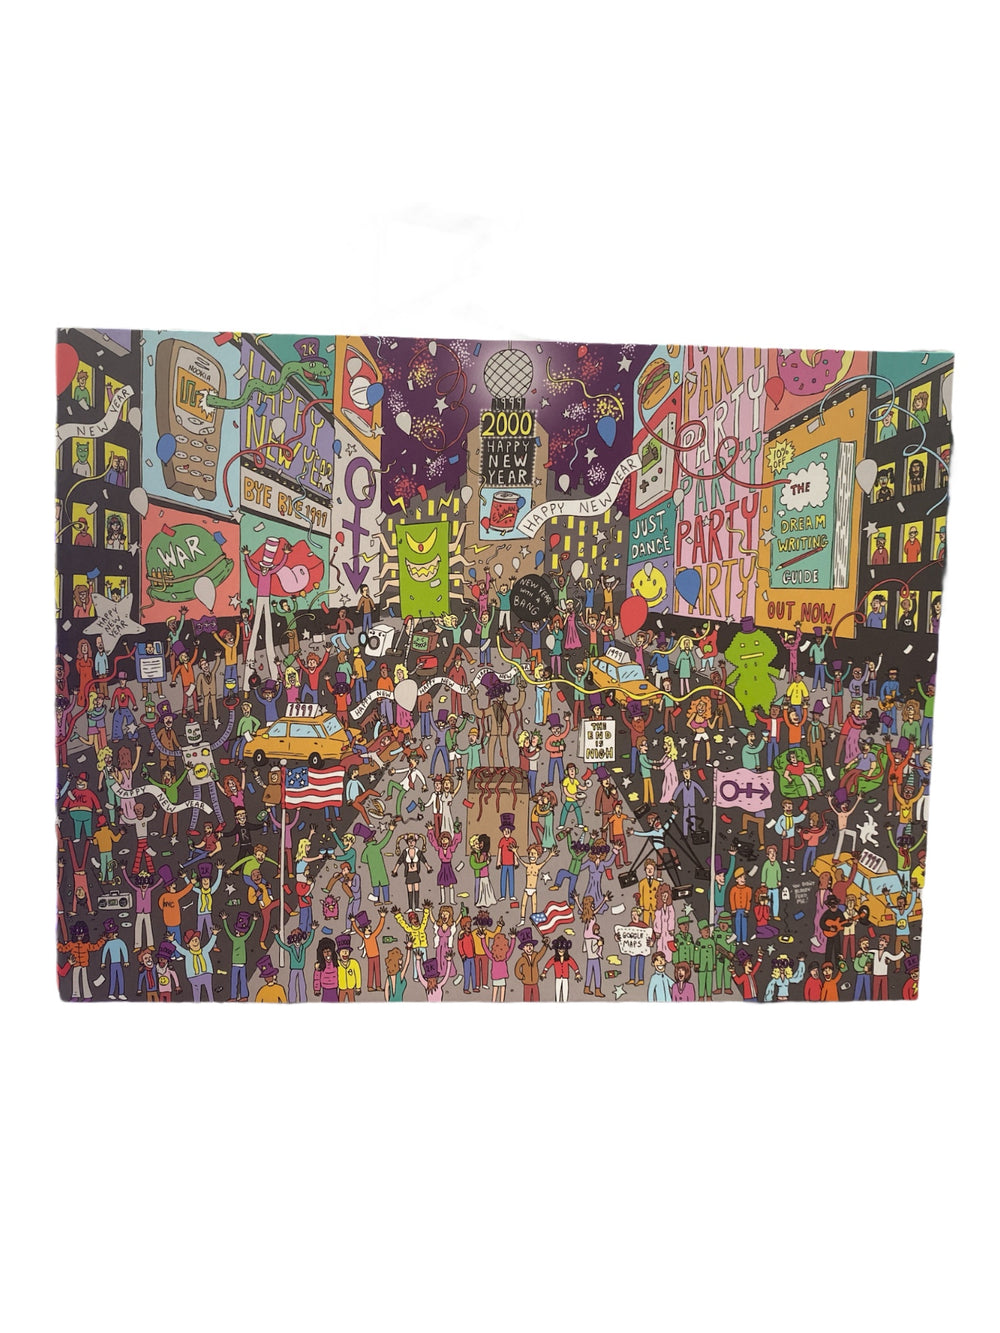 Where's Prince? Prince in 1999 : 500 Piece Jigsaw Puzzle Brand New Boxed